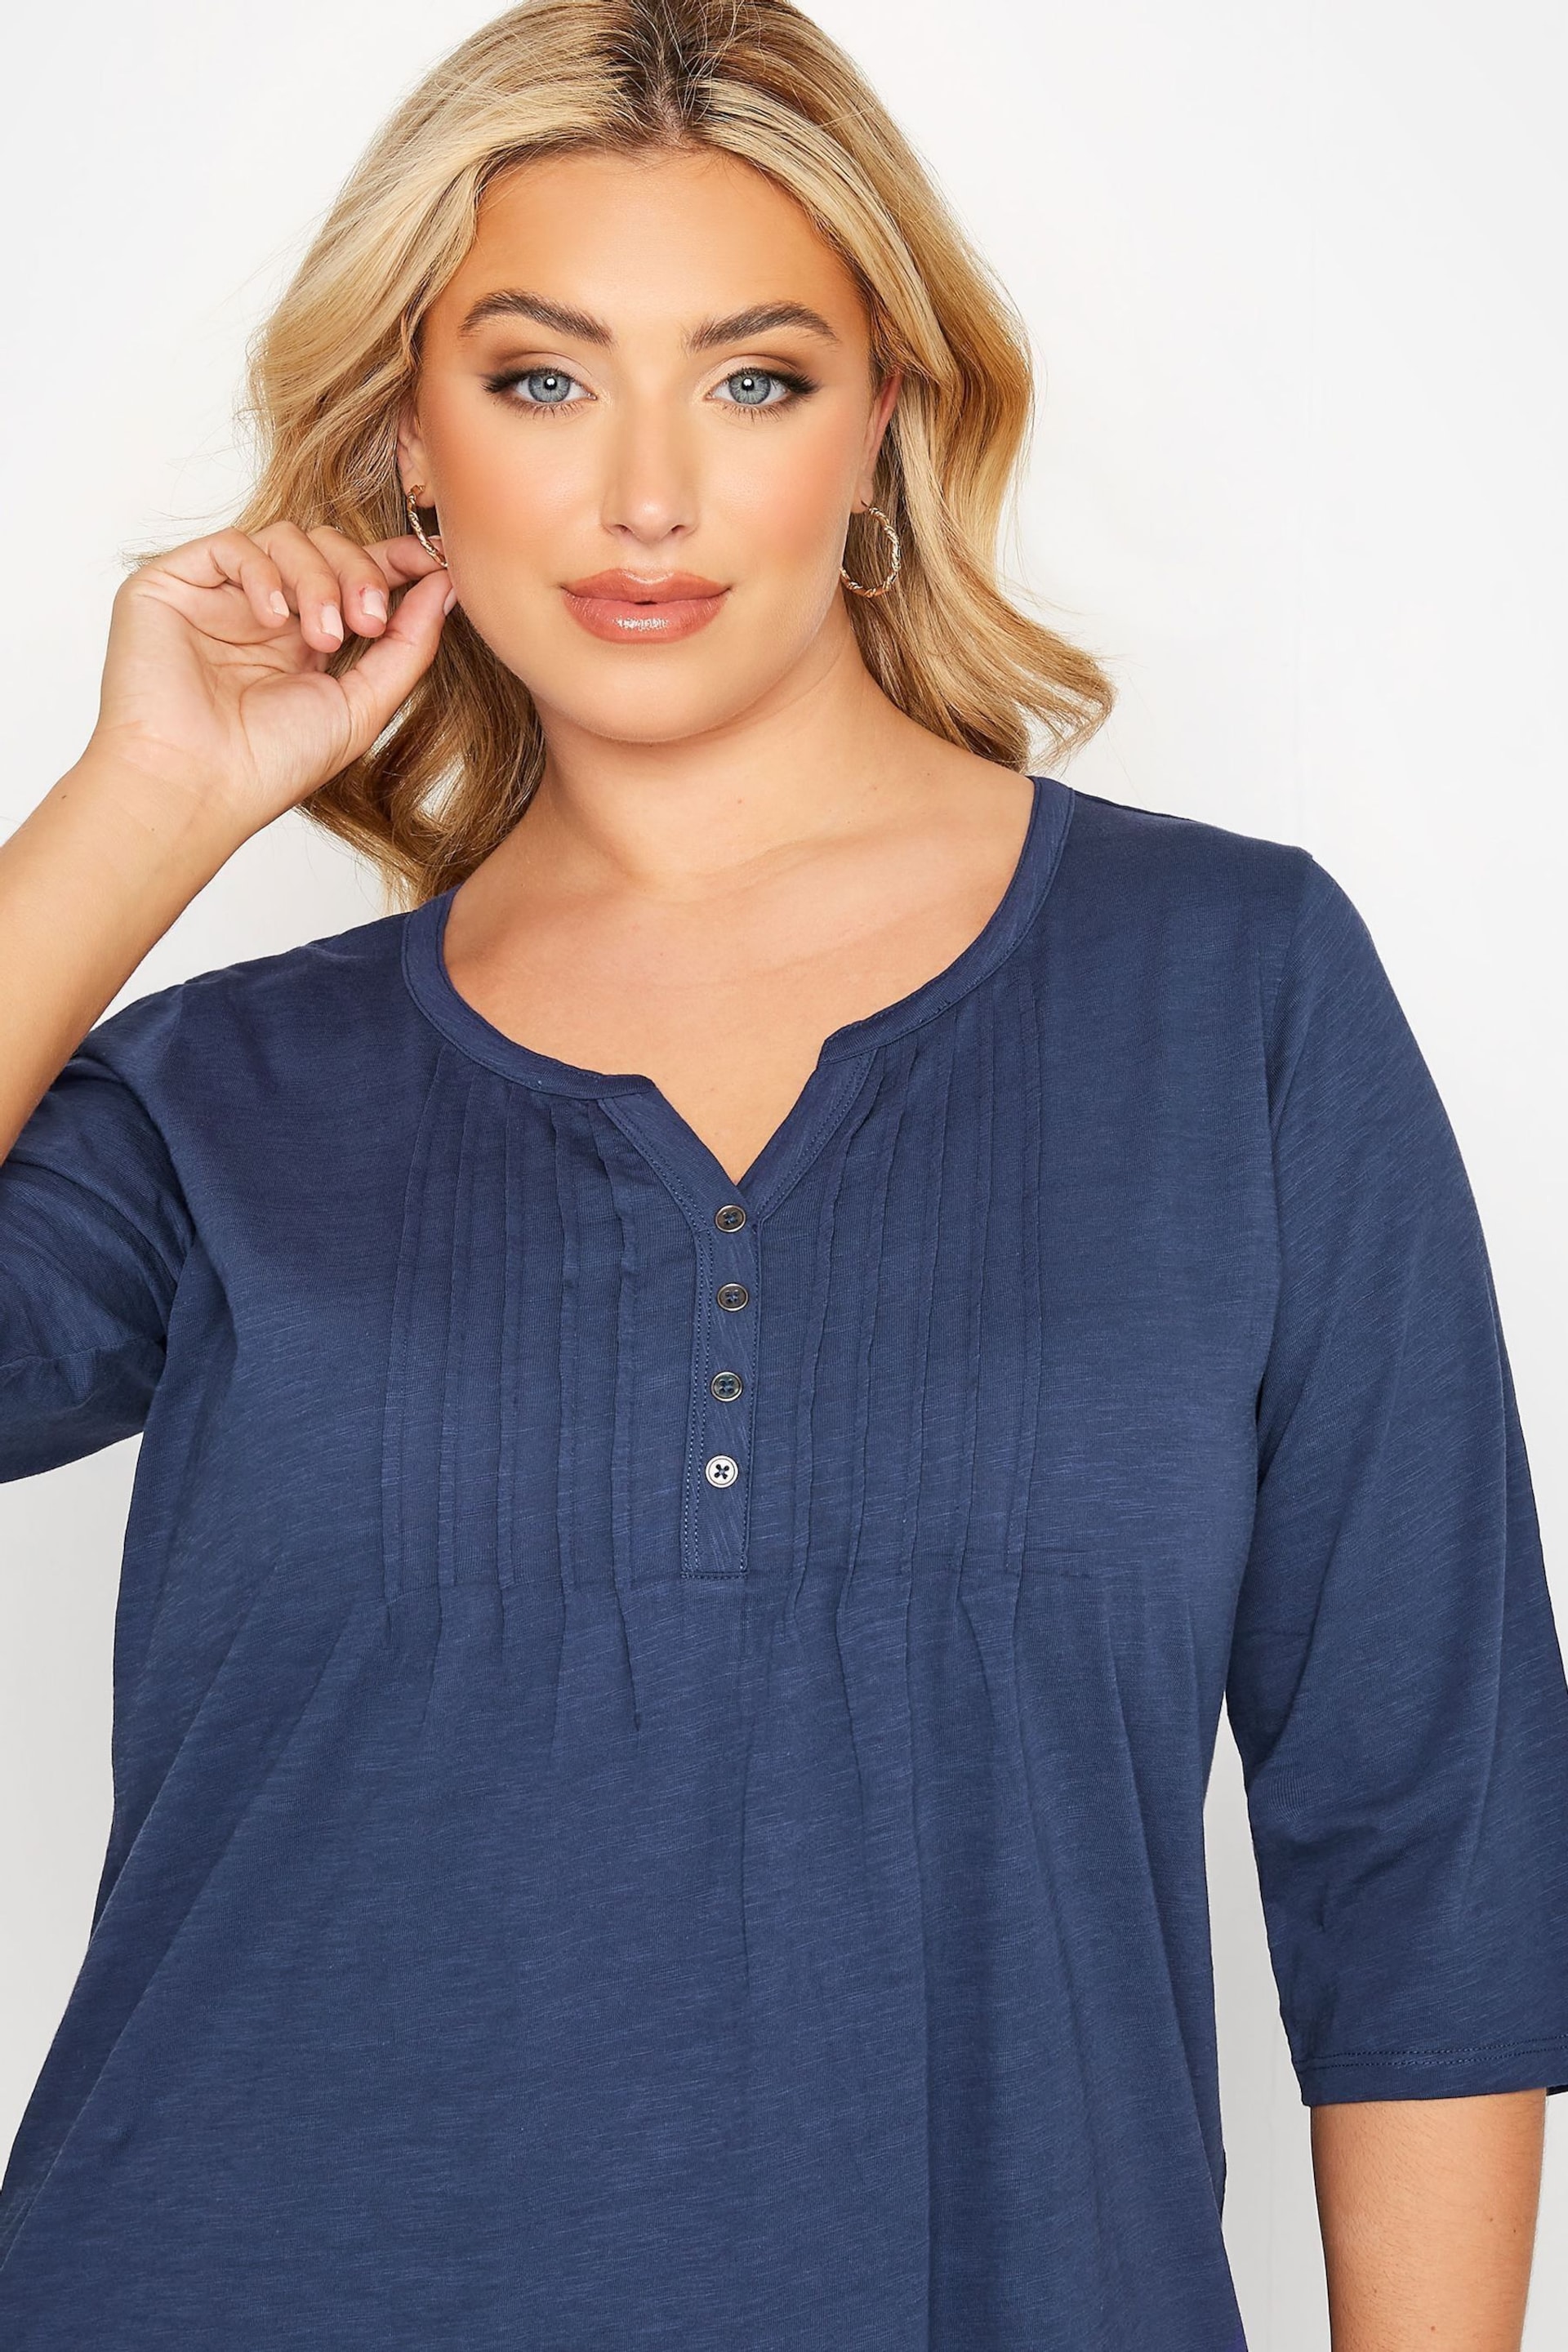 Yours Curve Blue Pintuck Henley Top - Image 4 of 4